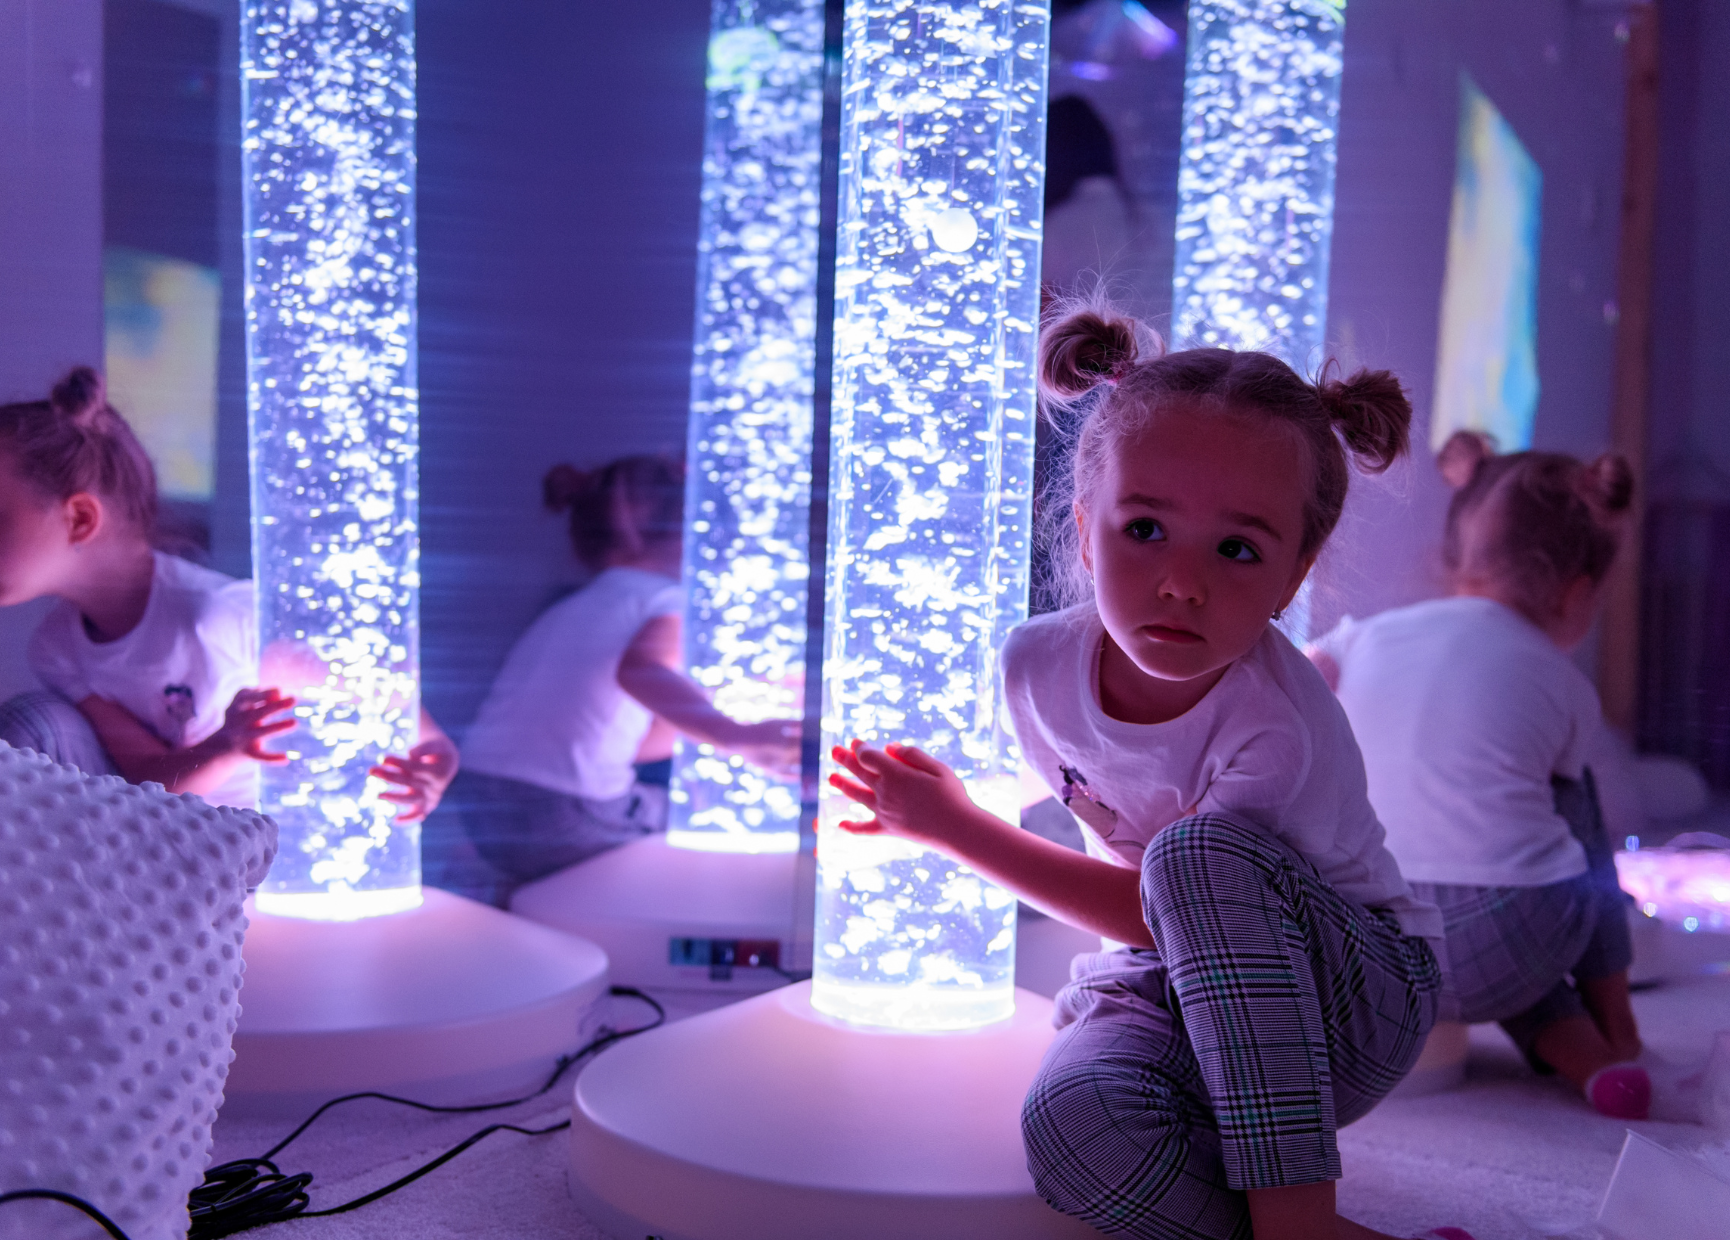 How to create your own sensory room